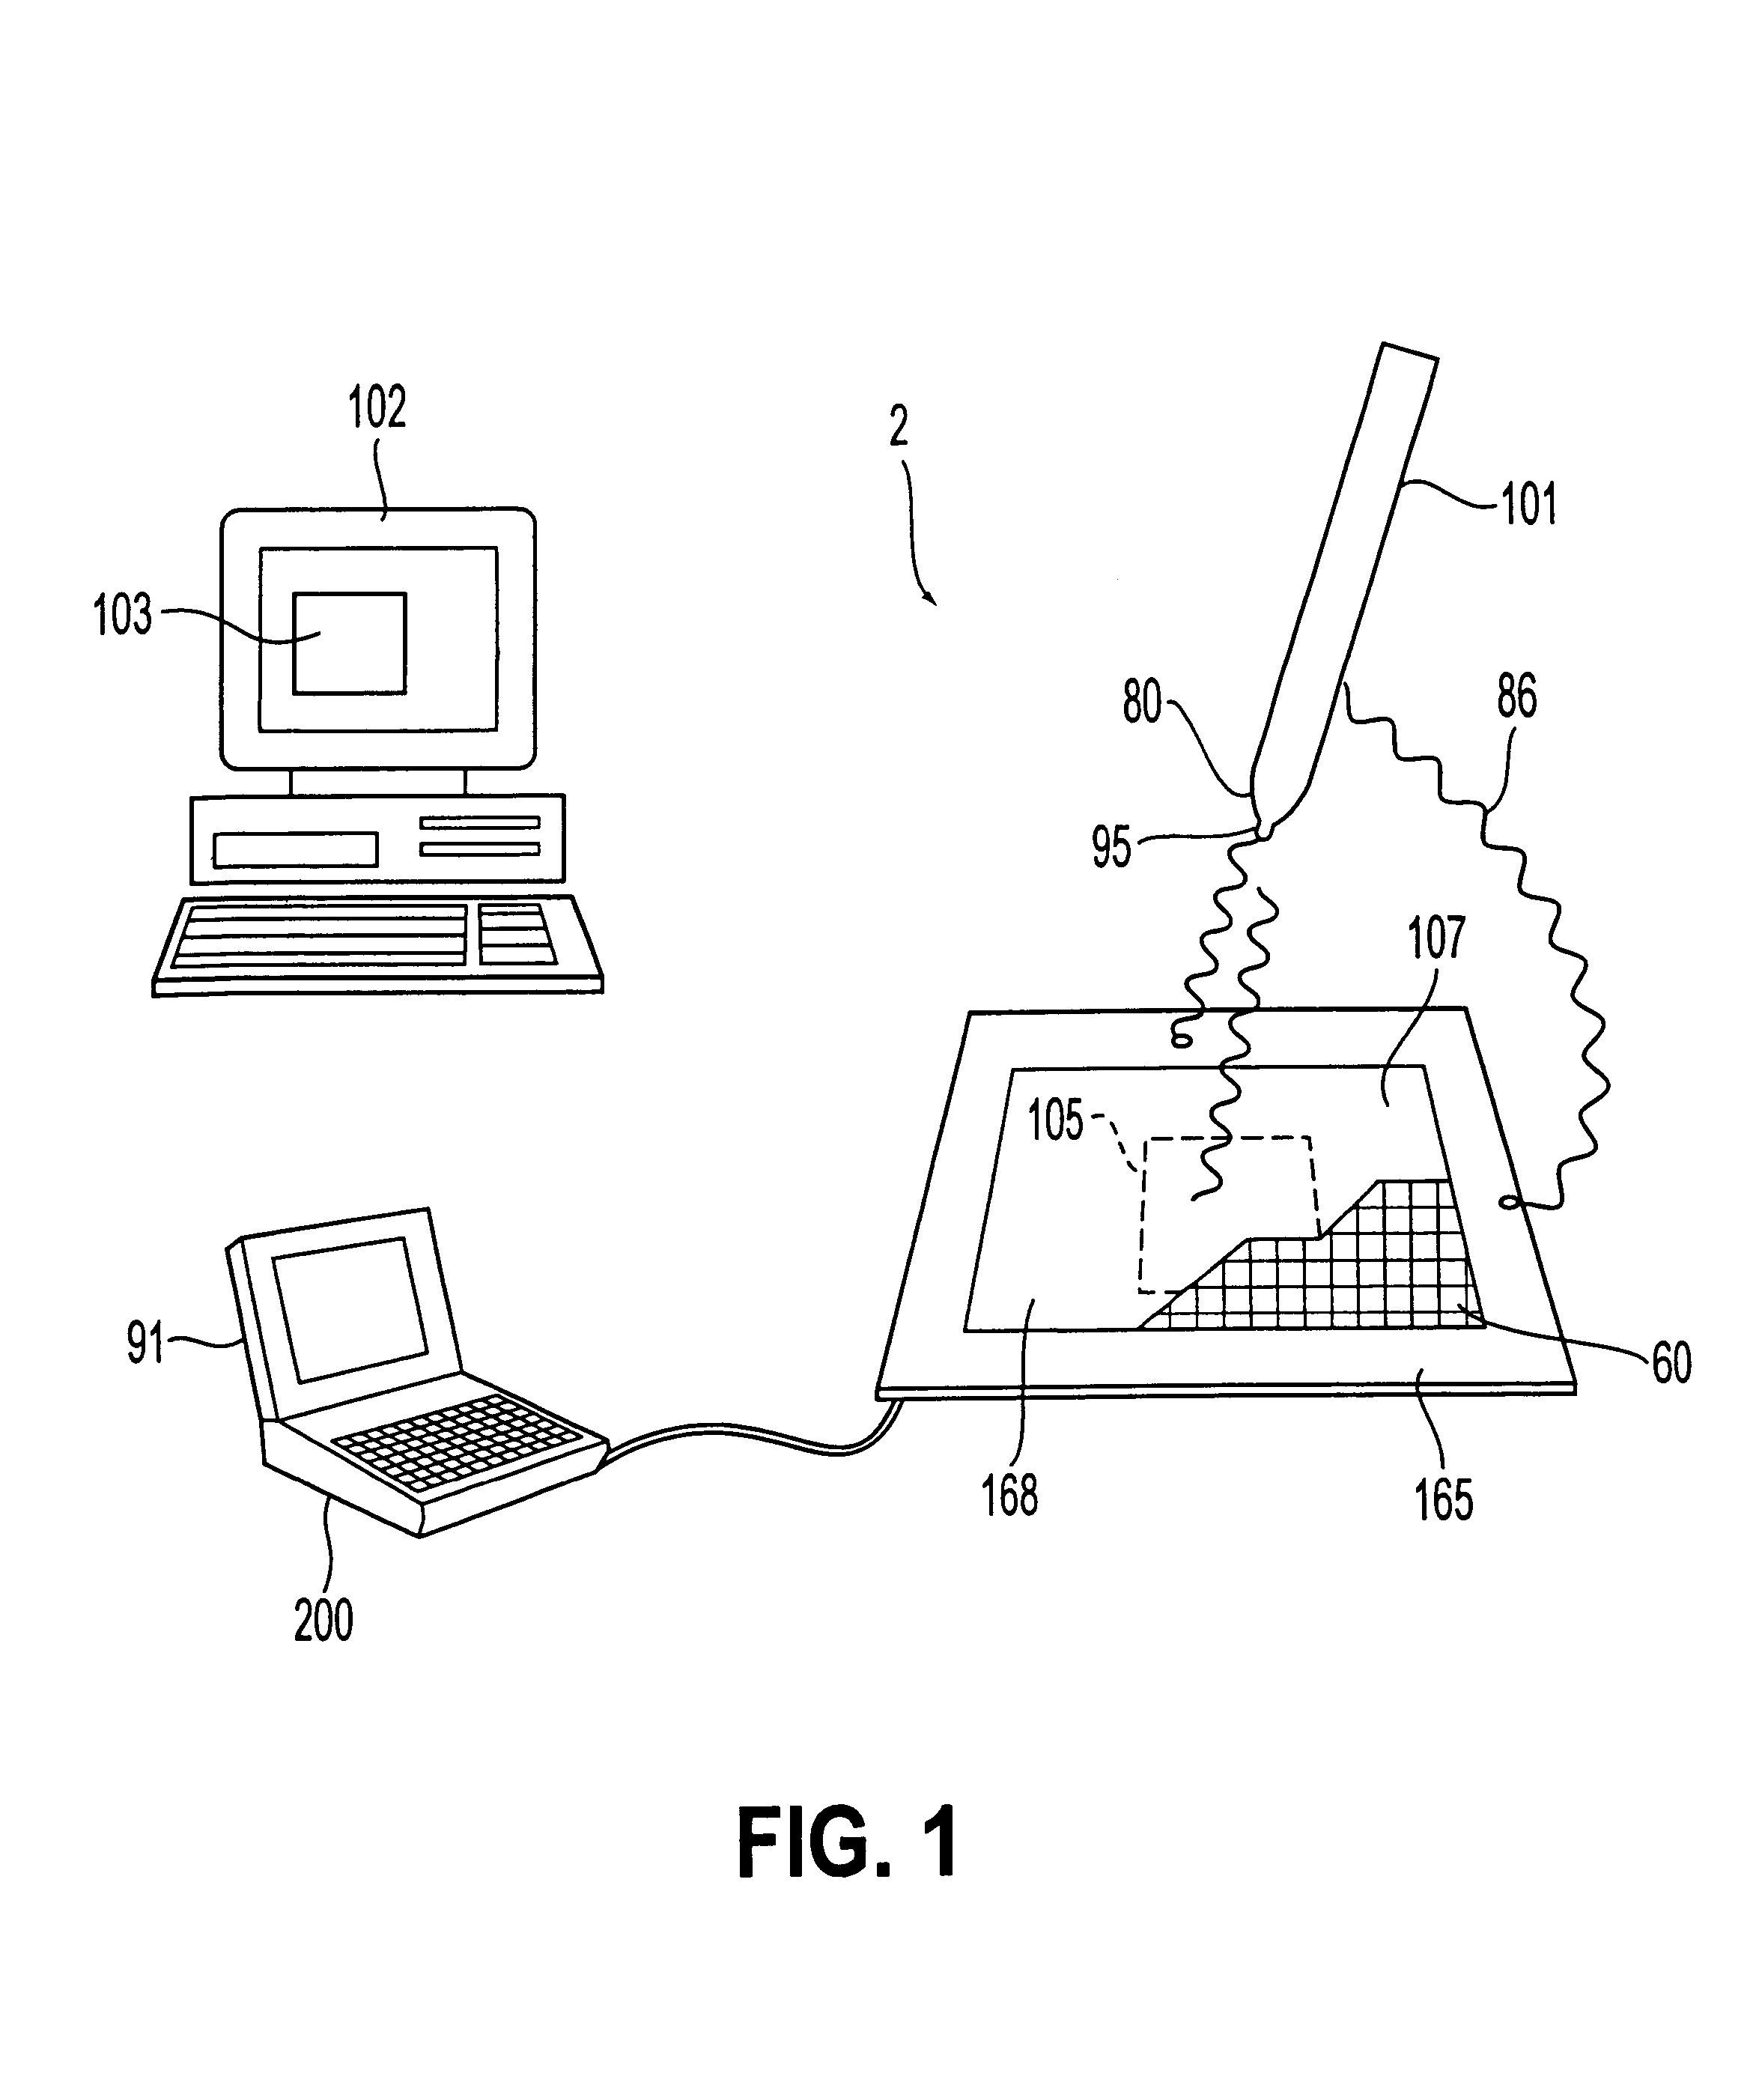 Method and system for position-aware freeform printing within a position-sensed area